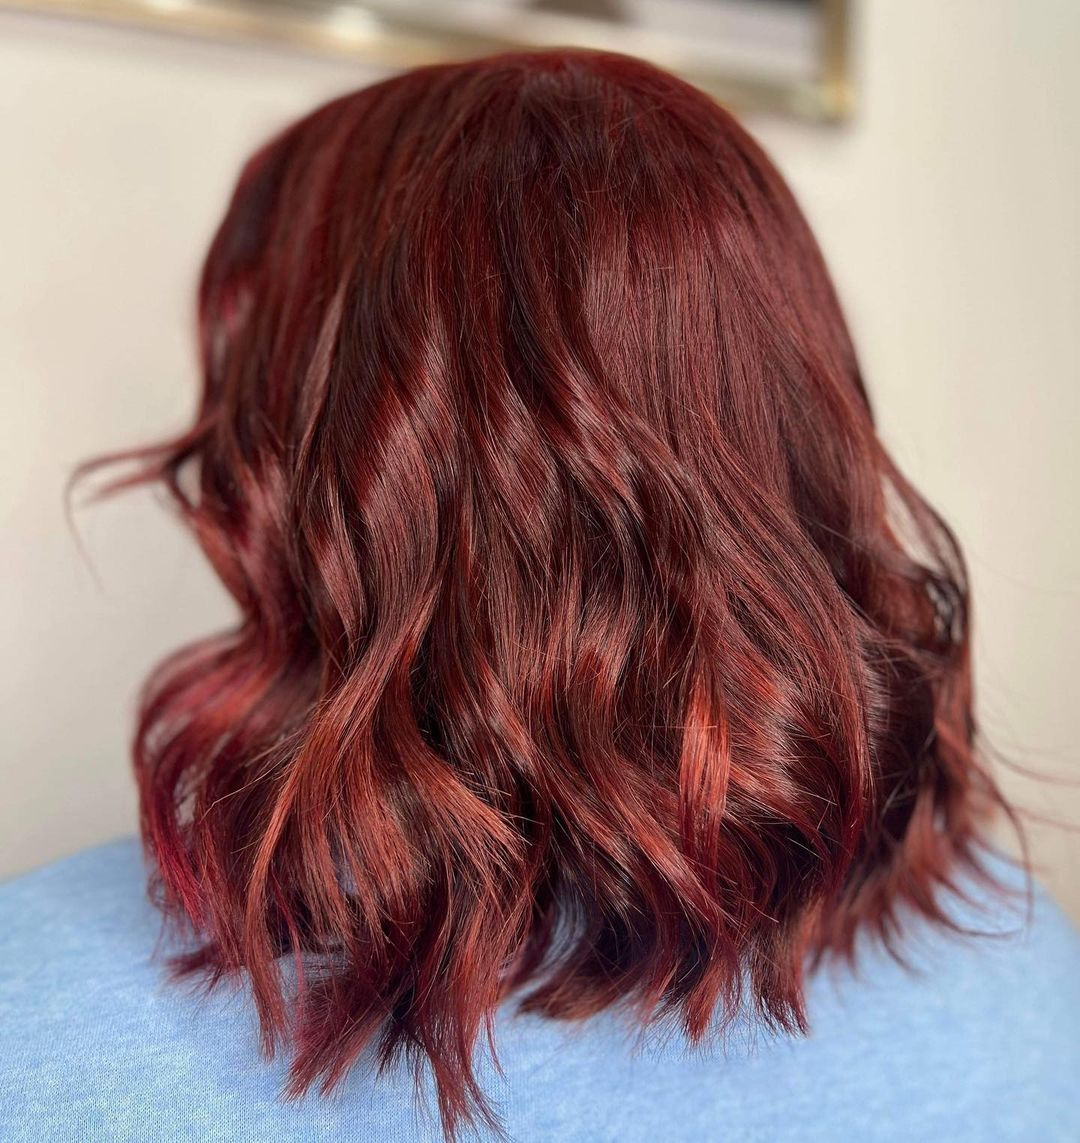 Copper Red Hair at The Salon, Langley Park